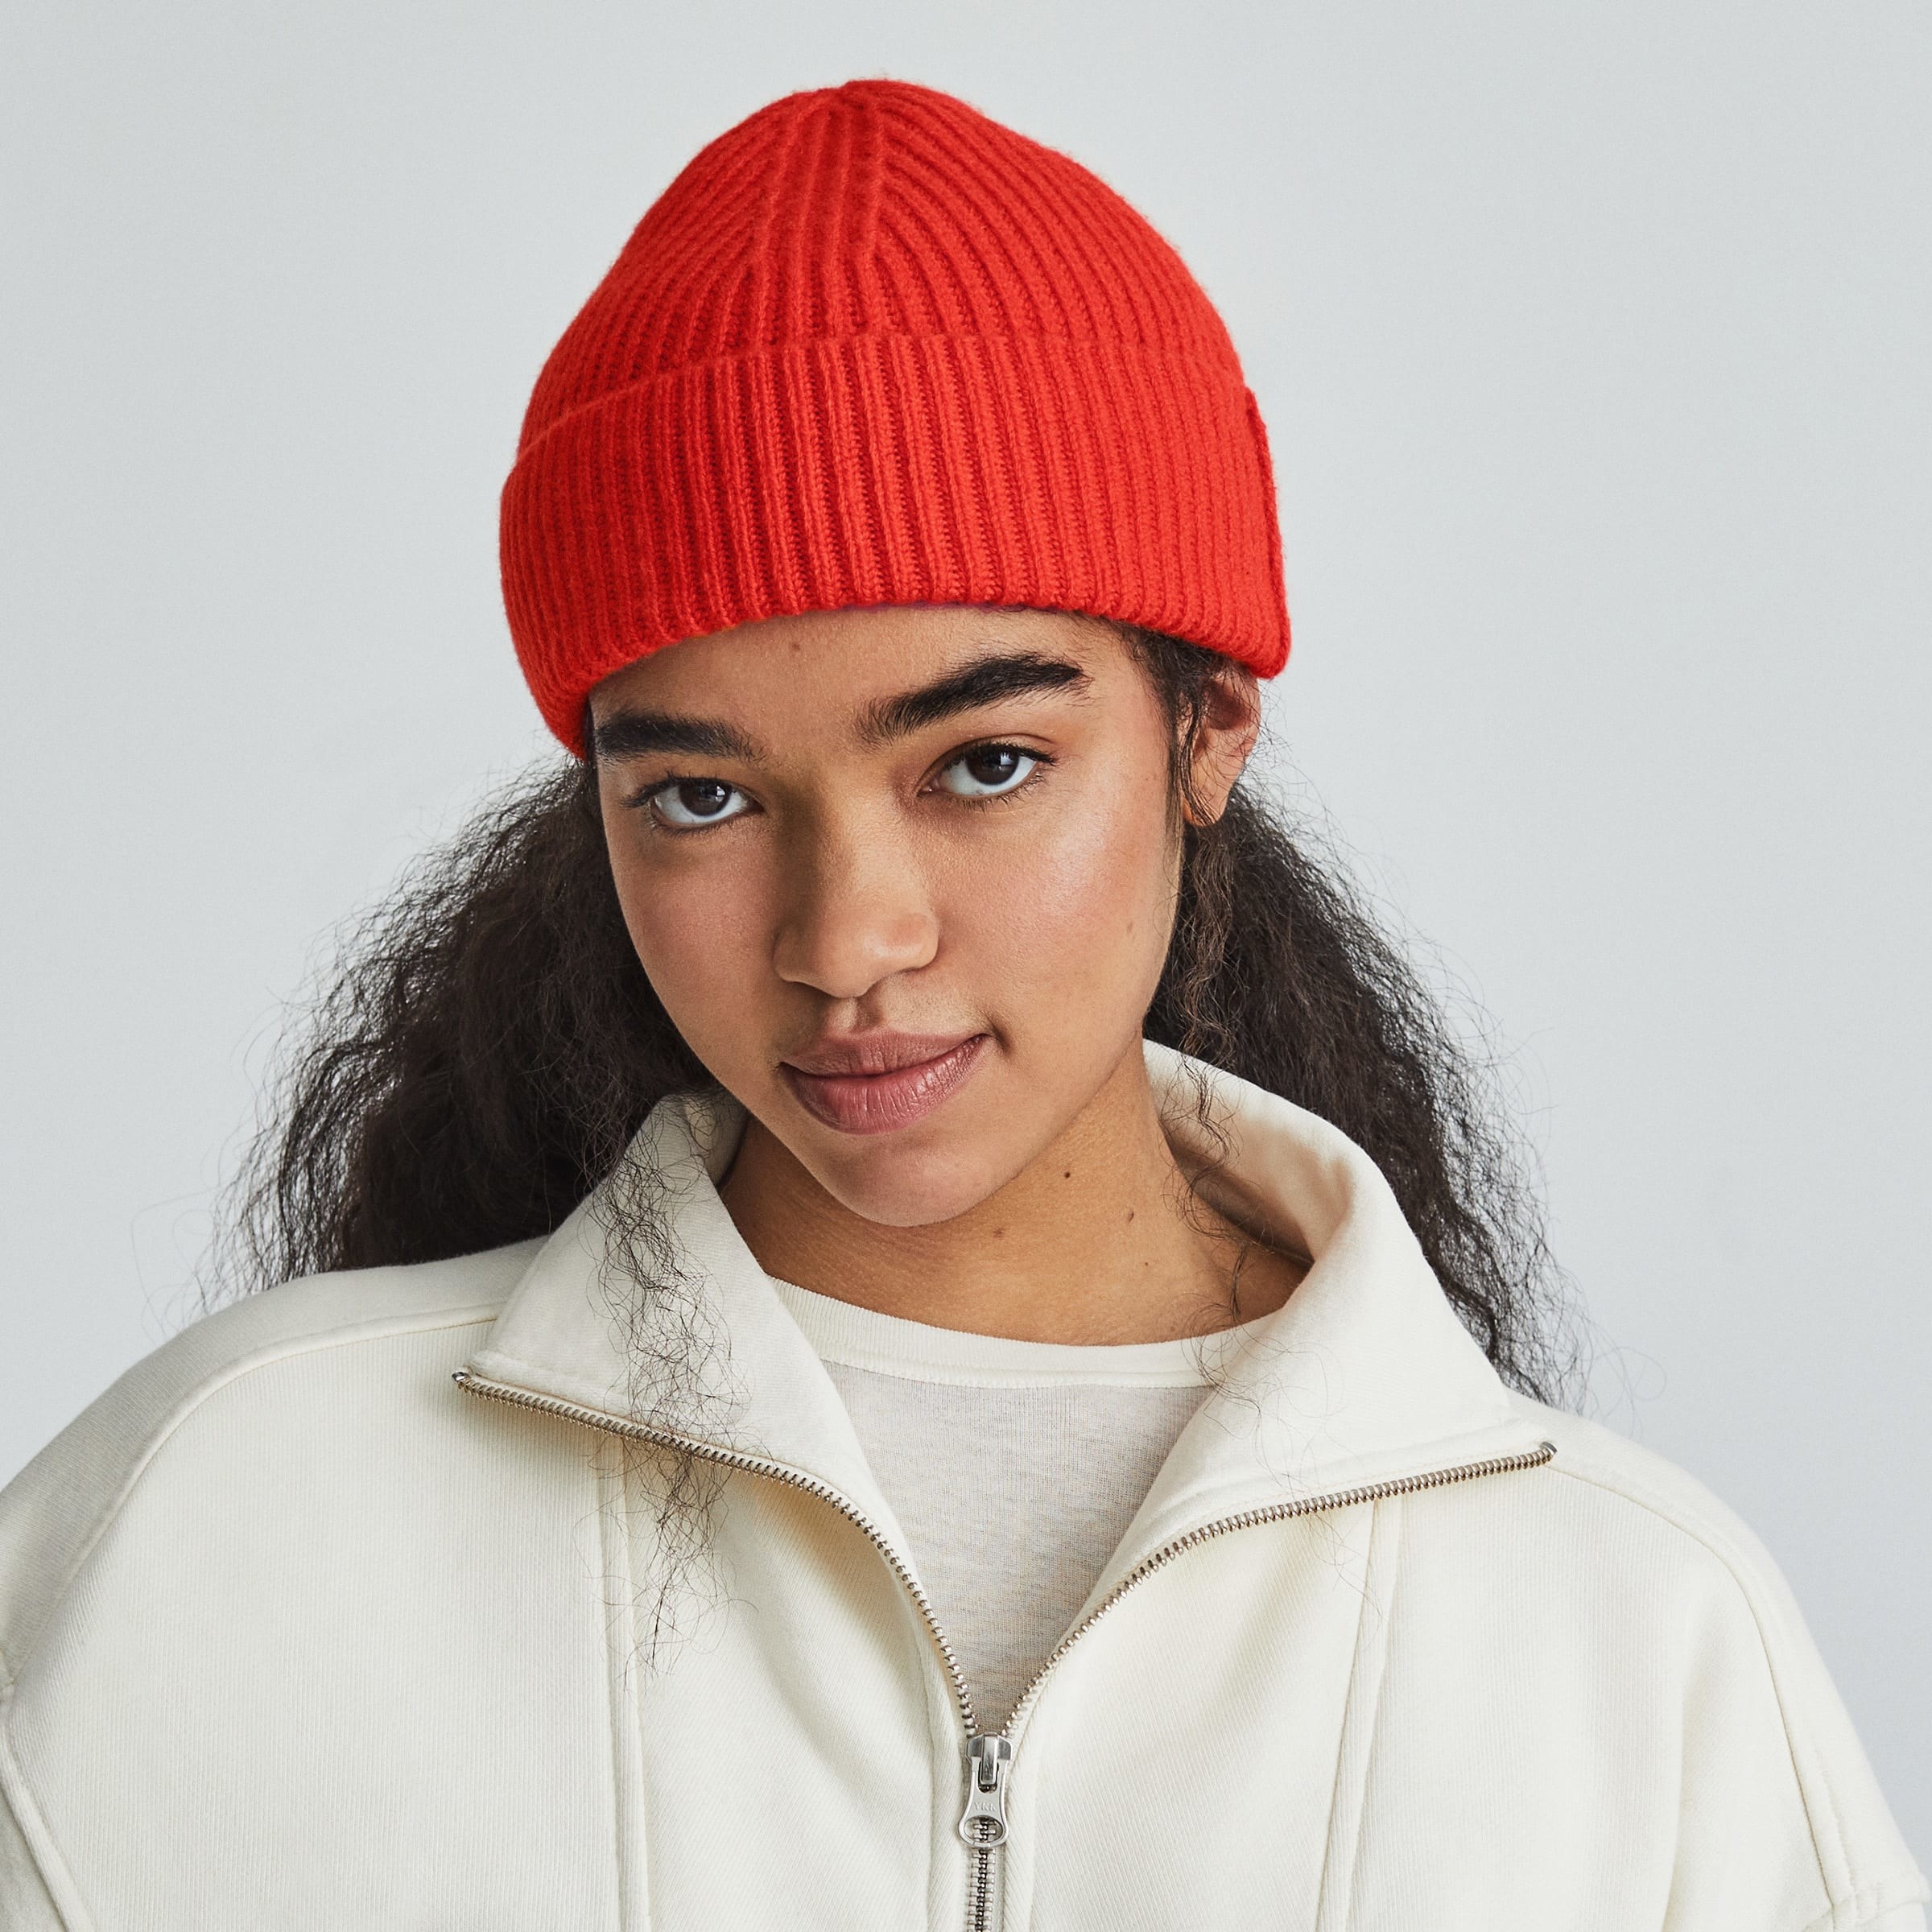 model in bright red beanie and cozy white half-zip pullover